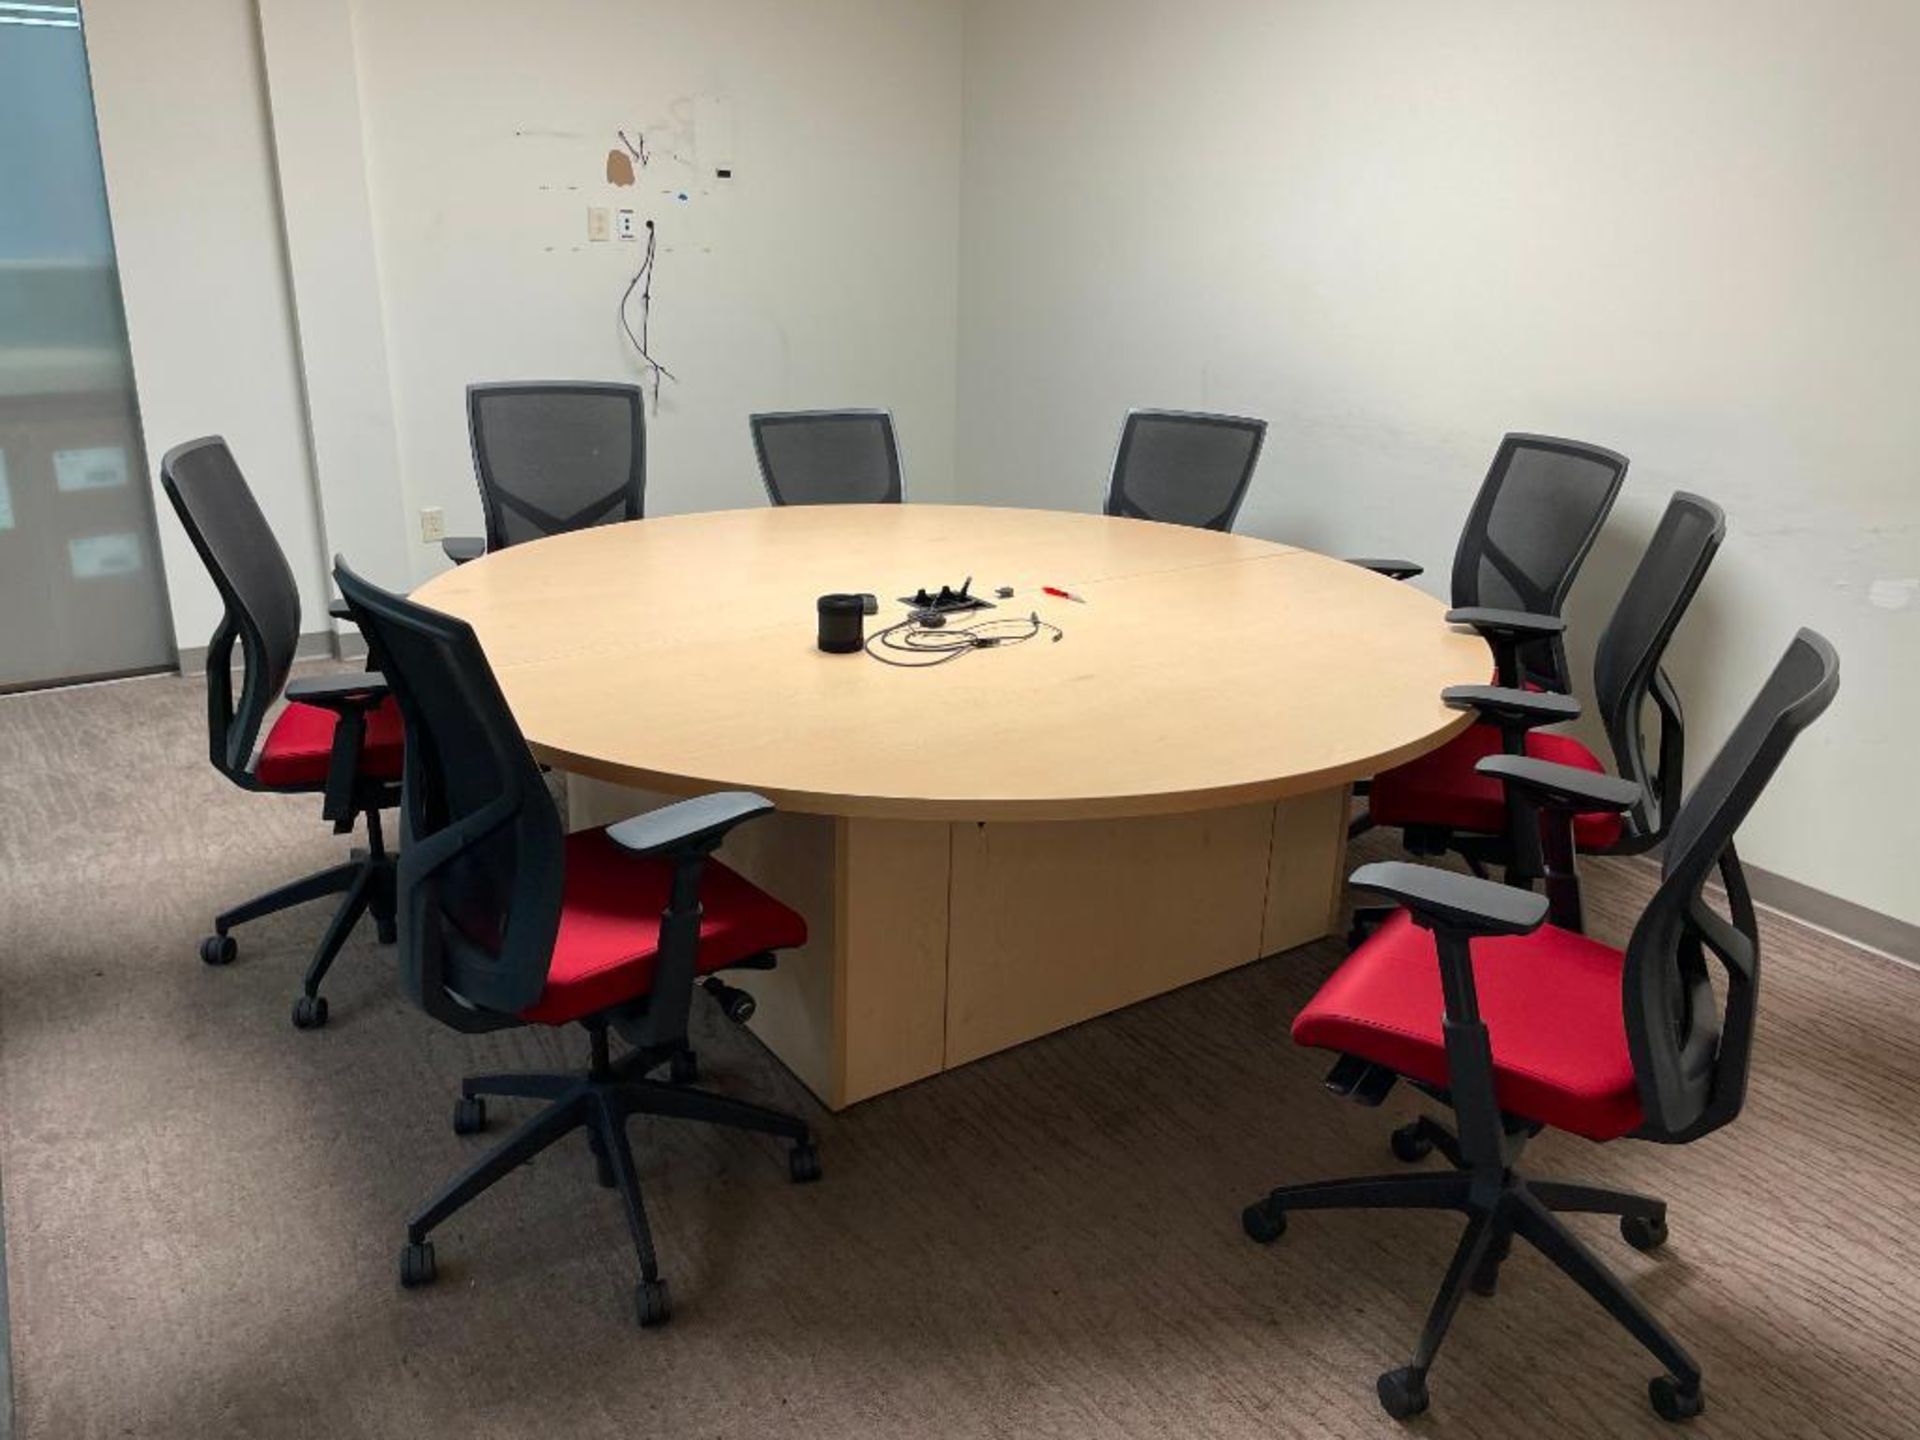 Circular Conference Table w/ (8) Office Chairs